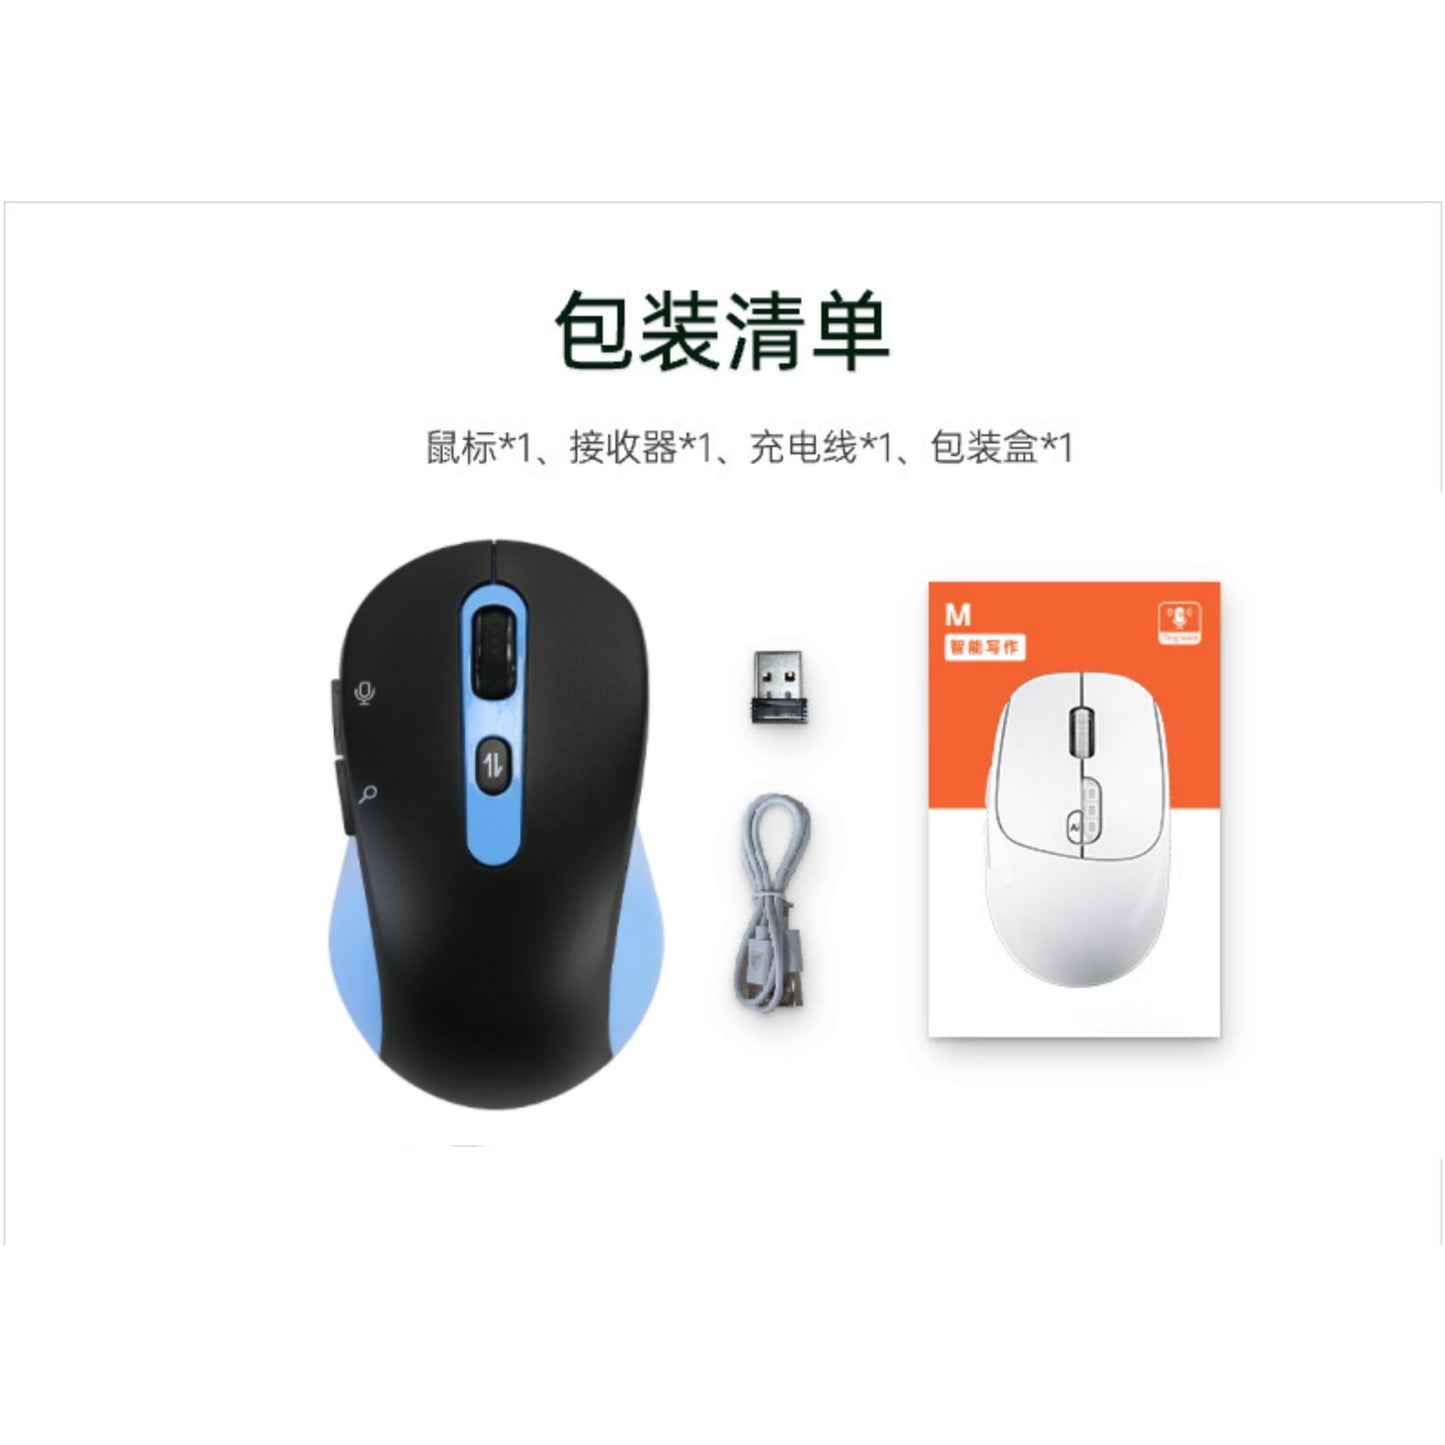 Ai typing mouse Talking mouse Translation mouse Ai mouse voice button function